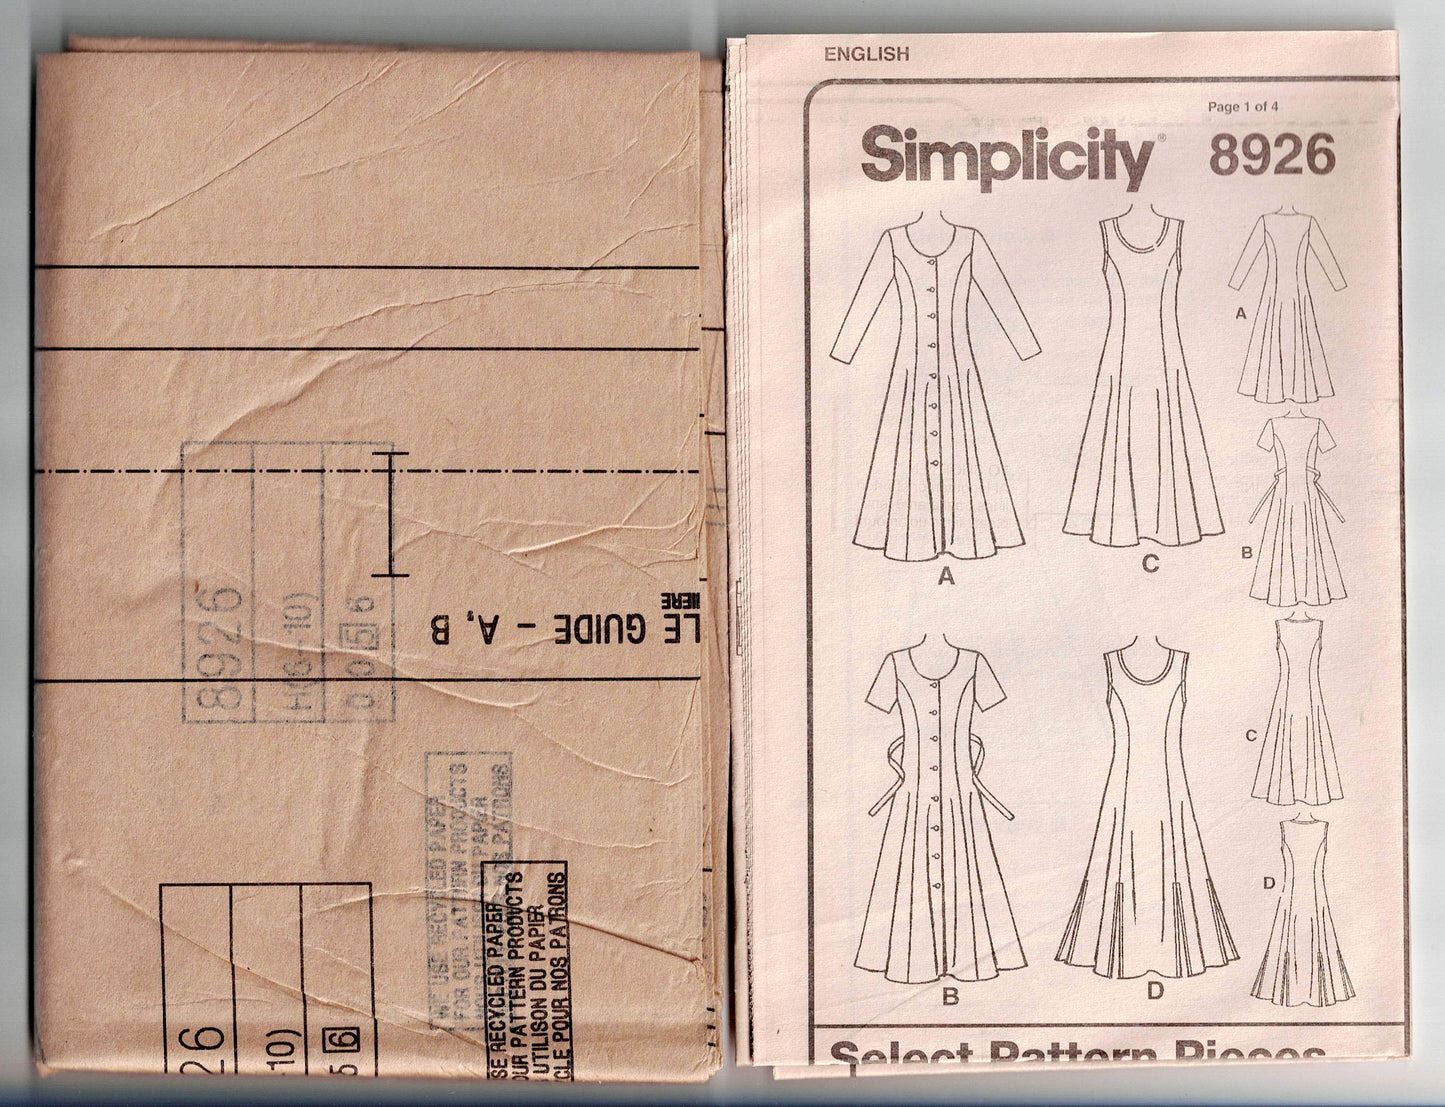 Simplicity 8926 CHRISTIE BRINKLEY Womens Princess Cut Dress with Waist Ties 1990s Vintage Sewing Pattern Size 6 - 10 UNCUT Factory Folded